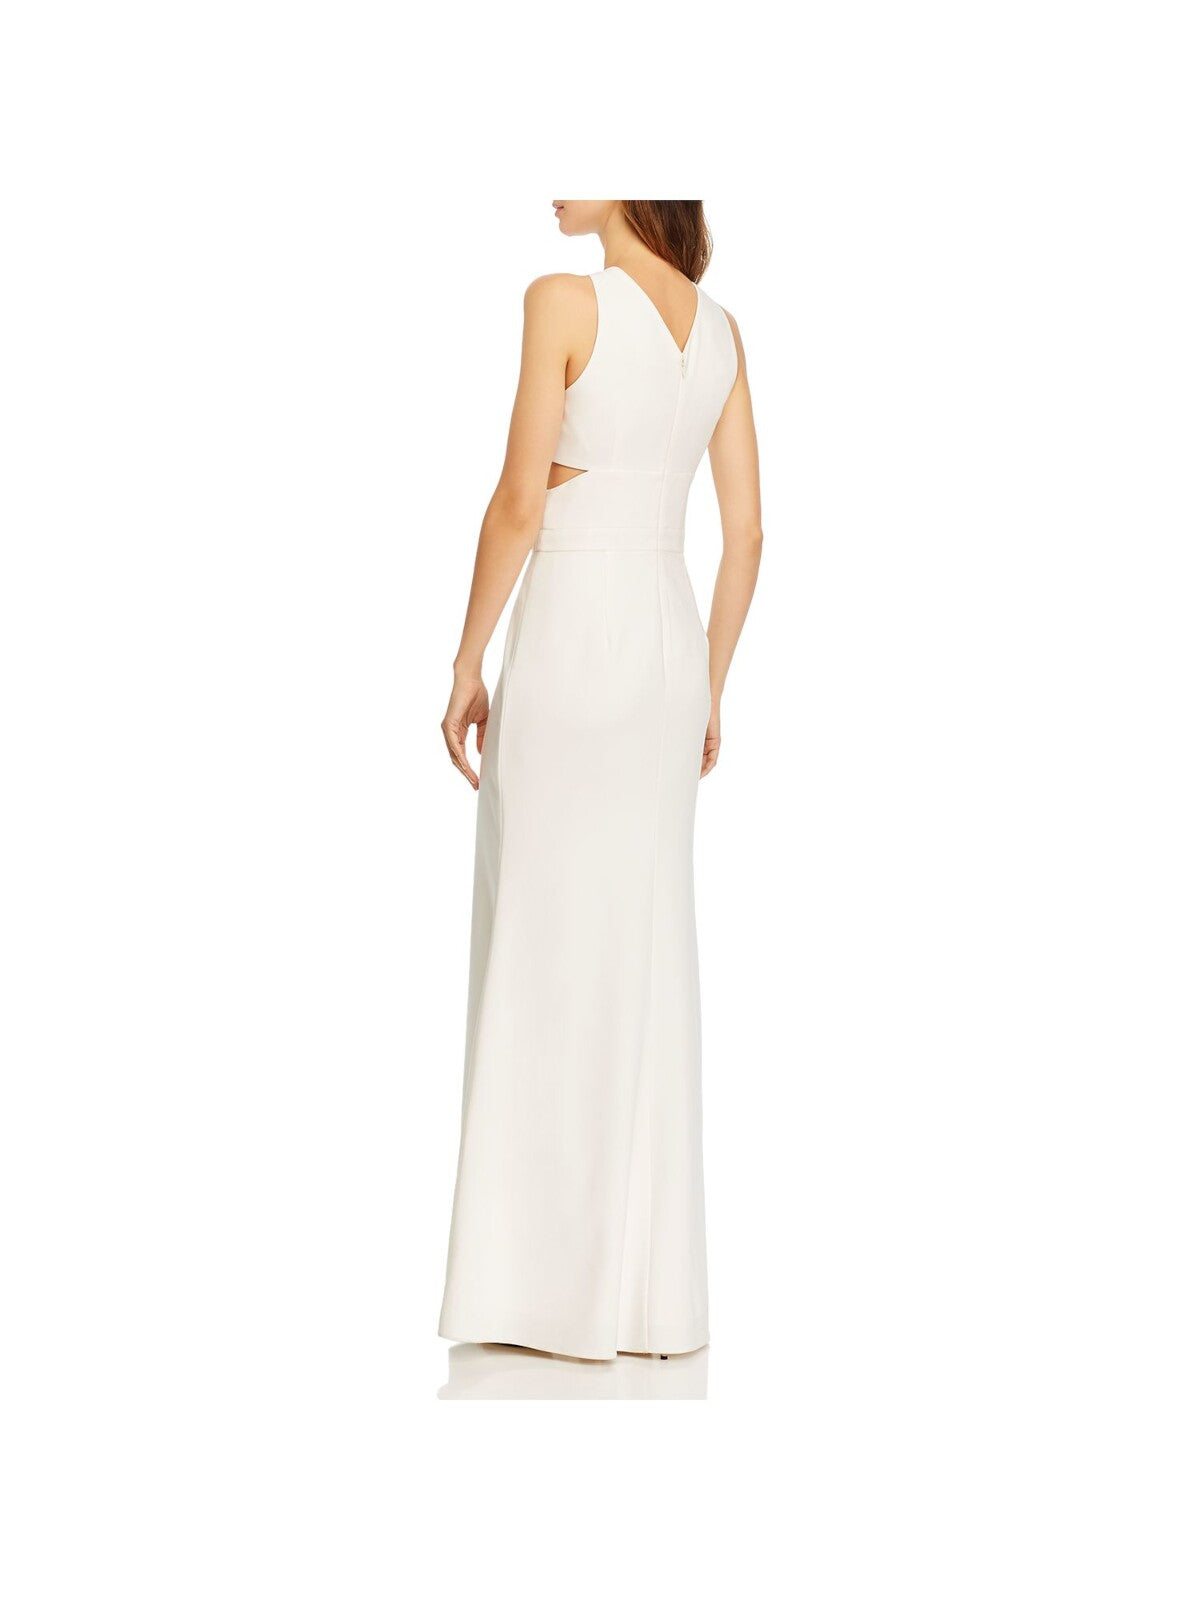 LAUNDRY Womens White Zippered Darted Side Cutout Sleeveless V Neck Full-Length Evening Gown Dress 0